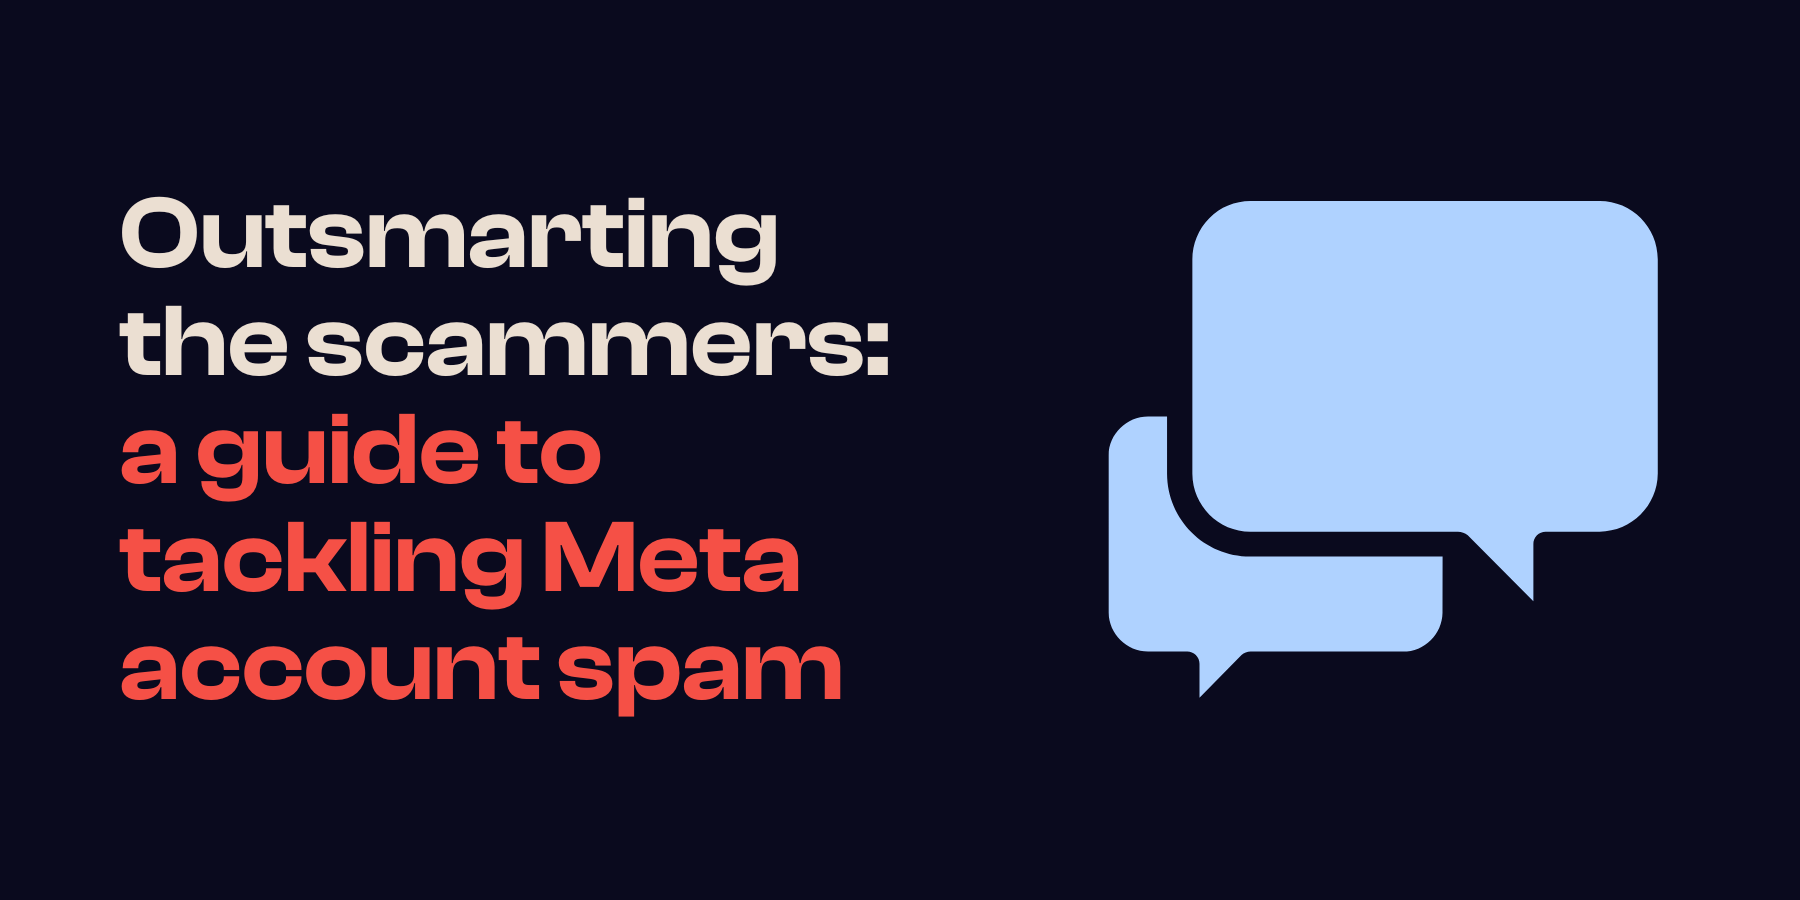 Outsmarting the scammers: a guide to tackling Meta account spam